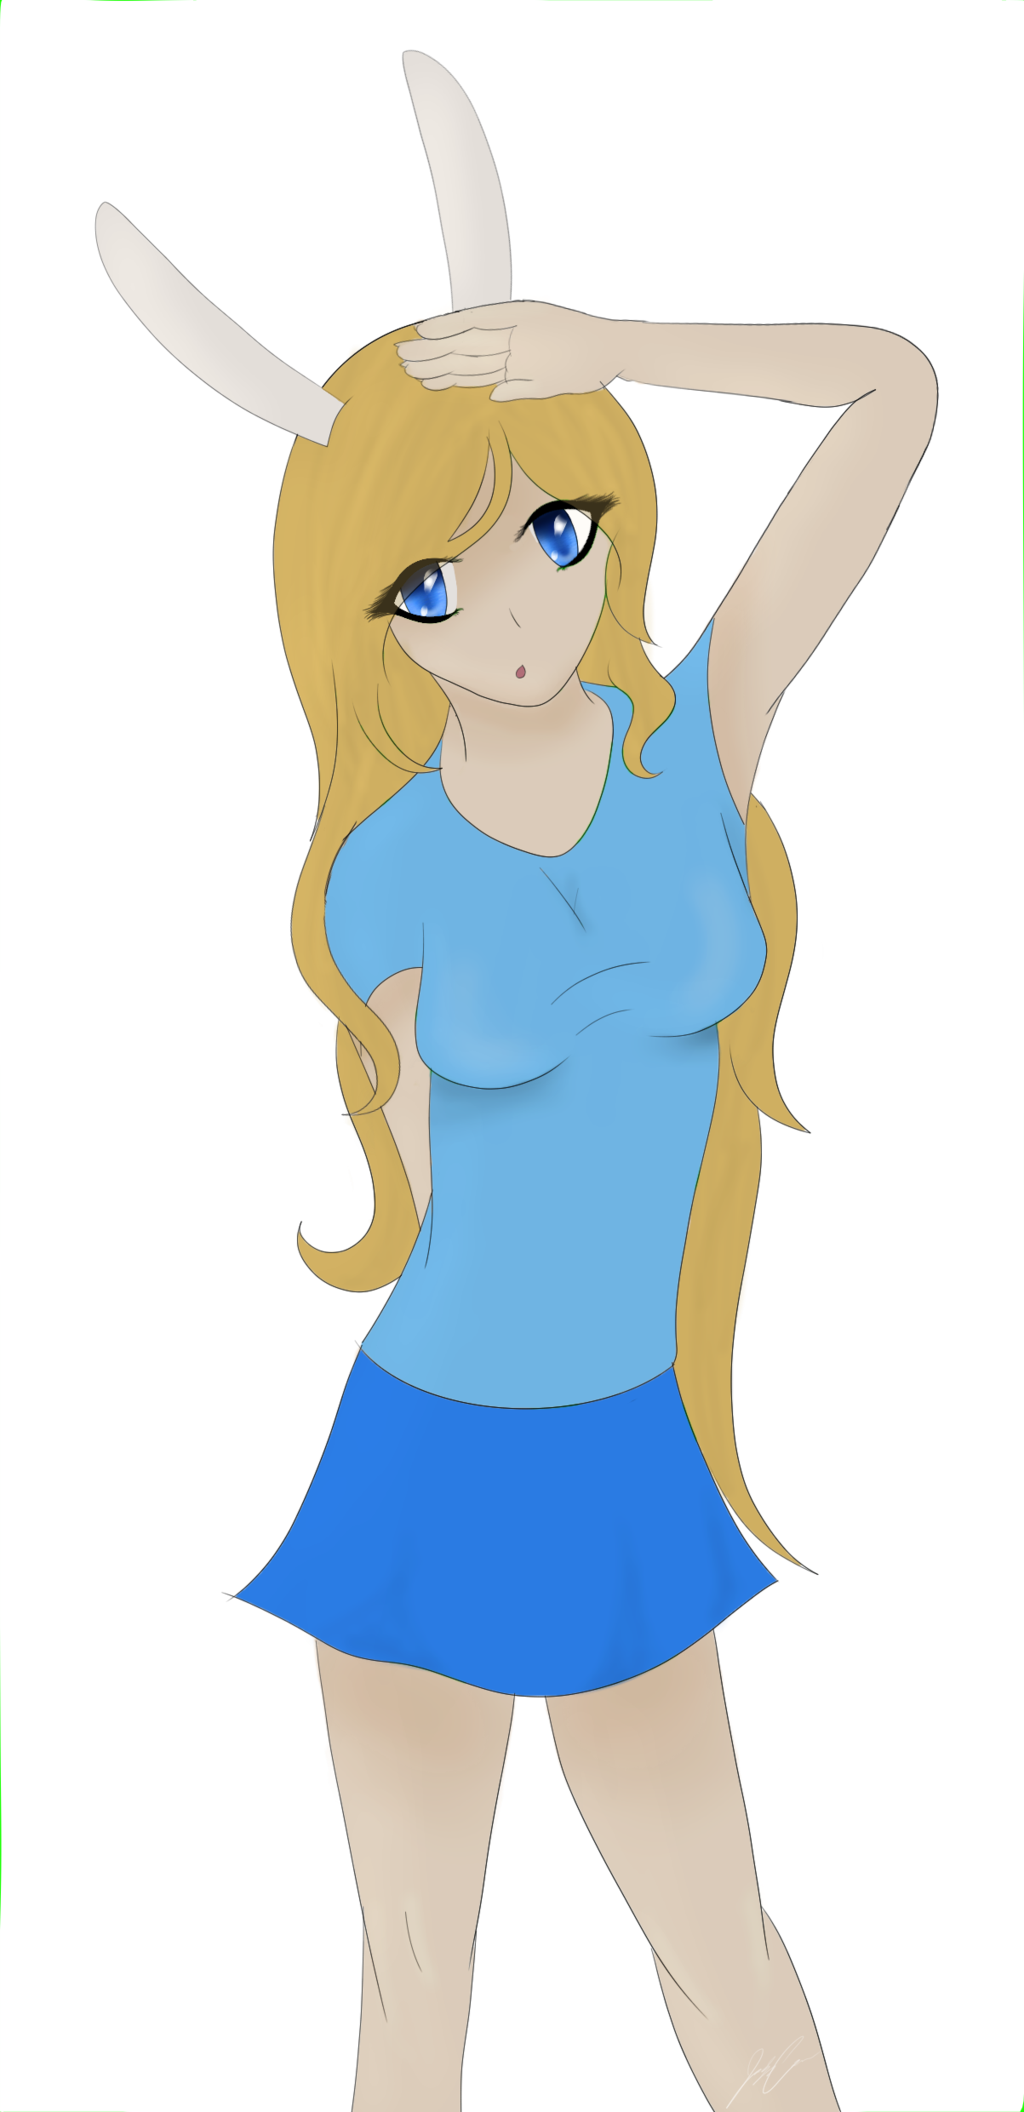 Fionna the human by GingaWeedLuver16 on